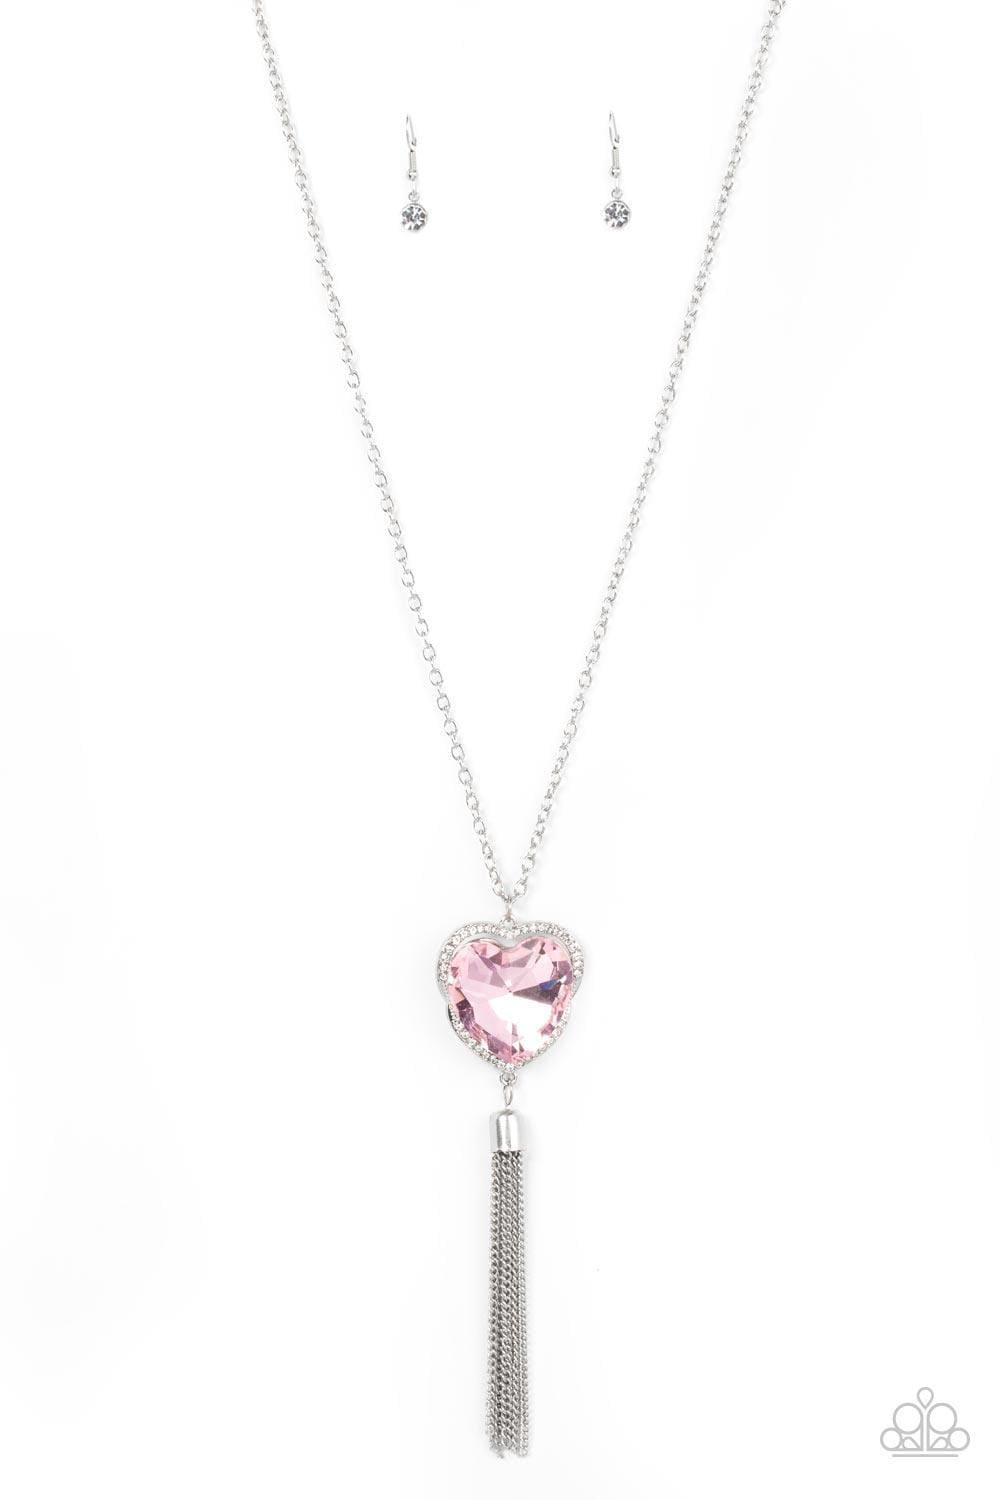 Paparazzi Accessories - Finding My Forever - Pink Necklace - Bling by JessieK